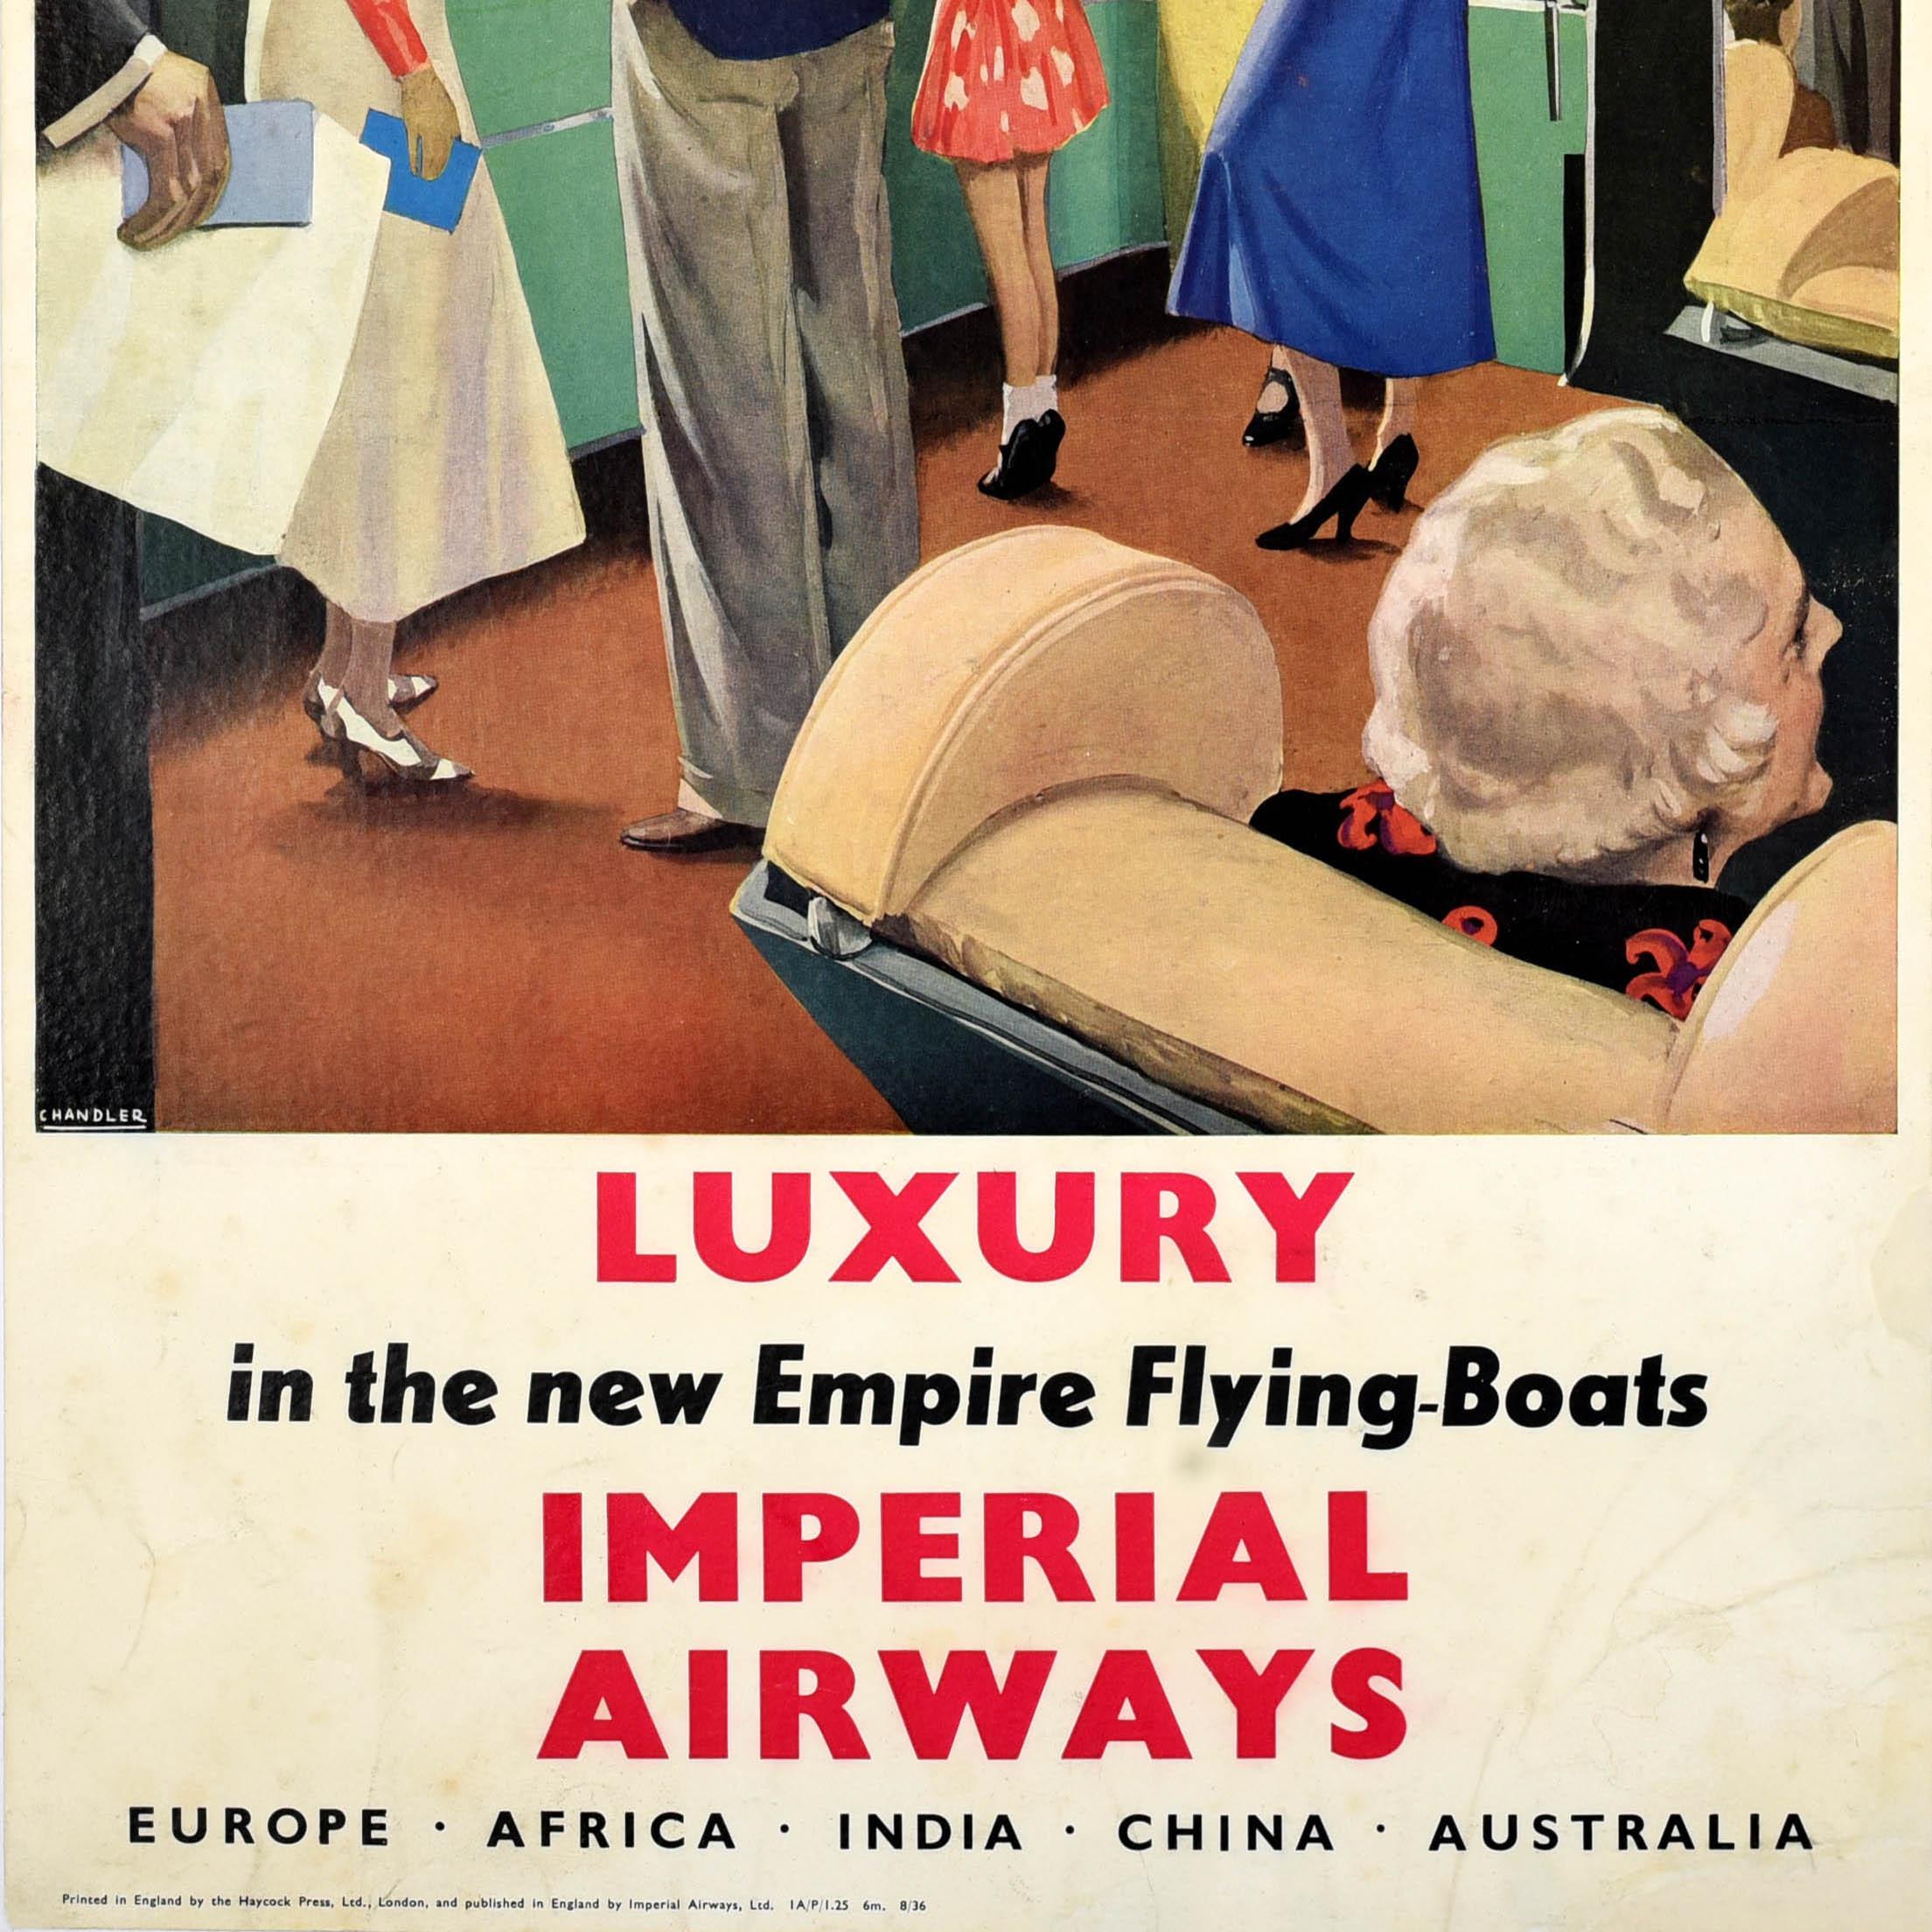 Original vintage travel advertising poster - Imperial Airways Luxury in the new Empire Flying-Boats to Europe Africa India China Australia - featuring colourful artwork of smartly dressed passengers chatting with each other in a plane cabin, the men